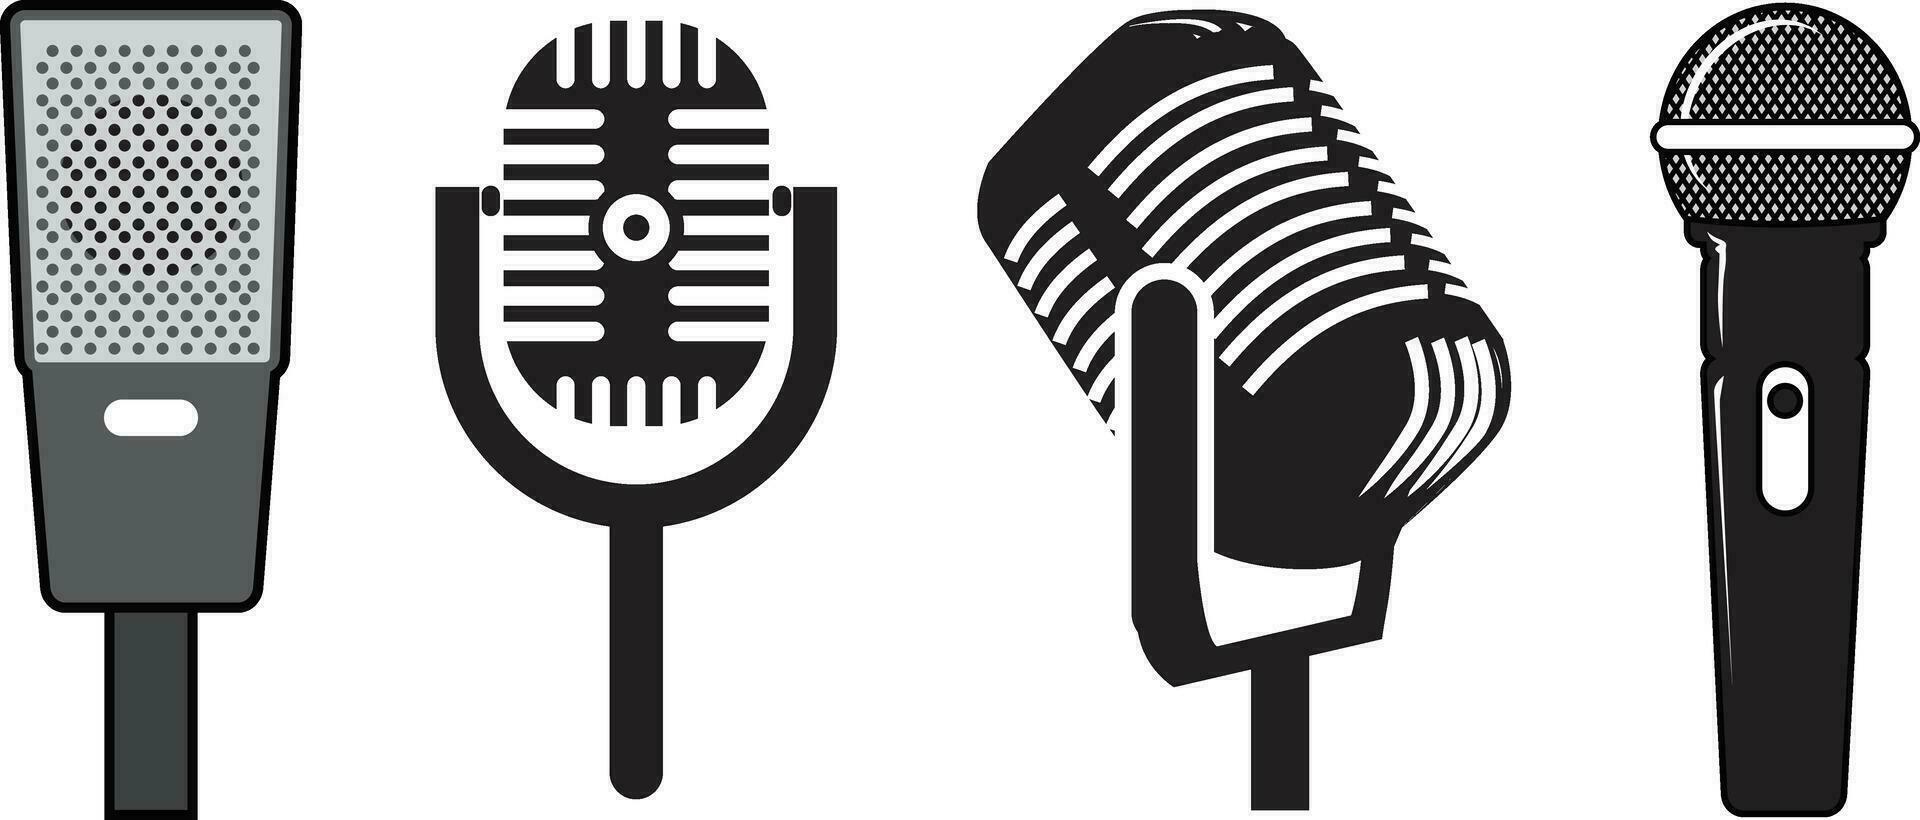 Podcast. Microphone icon. Set of radio podcast icons. vector